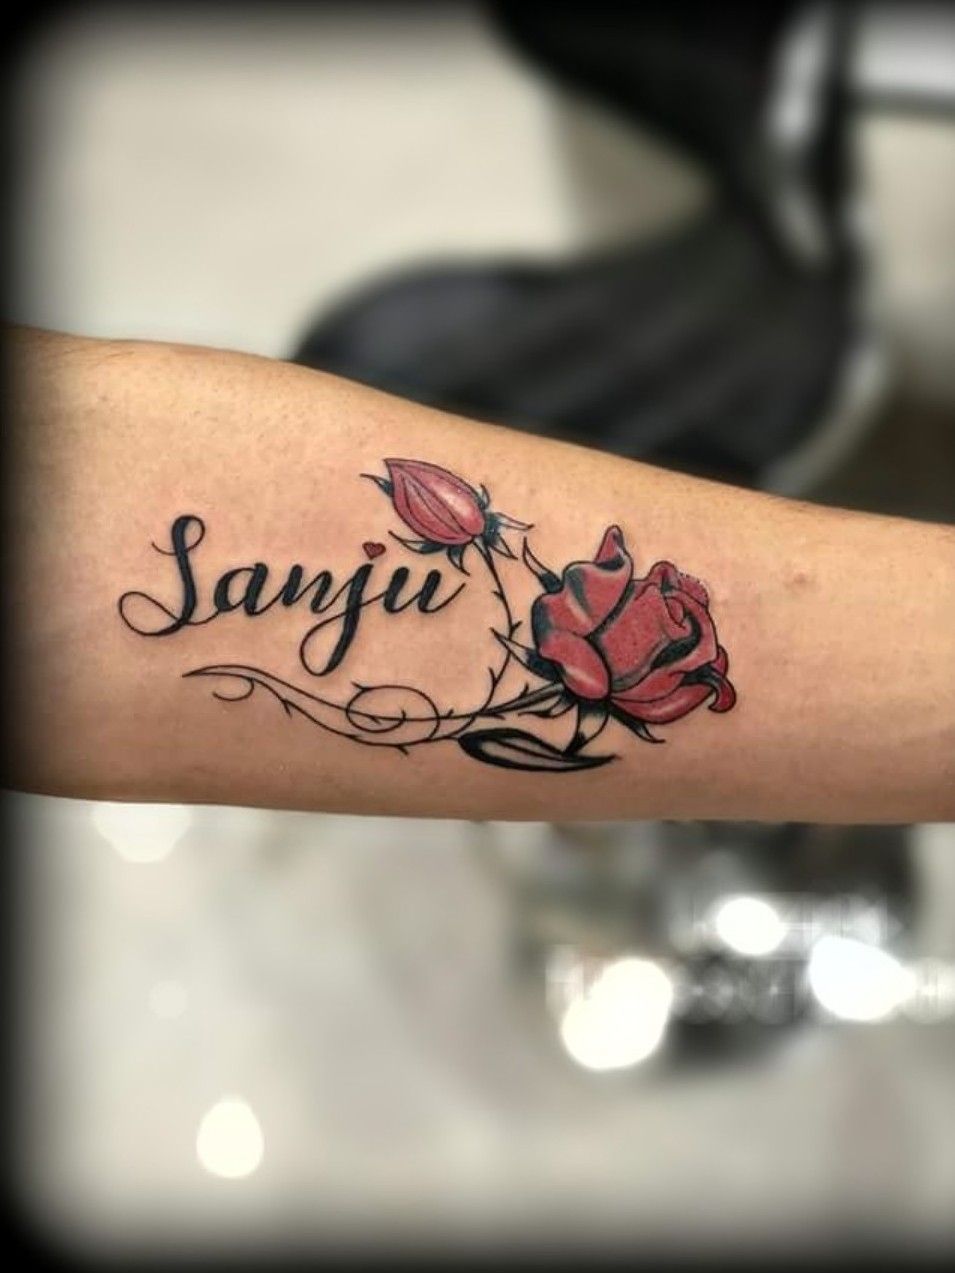 MouLees Tattoo Art Studio  wwwmouleestattooartcom Sanju  Clean  and neat work done by our champ Sanket Ahire For an appointment call  9890665043 Google  FB  JD Insta mouleestattooart sanketahireart     